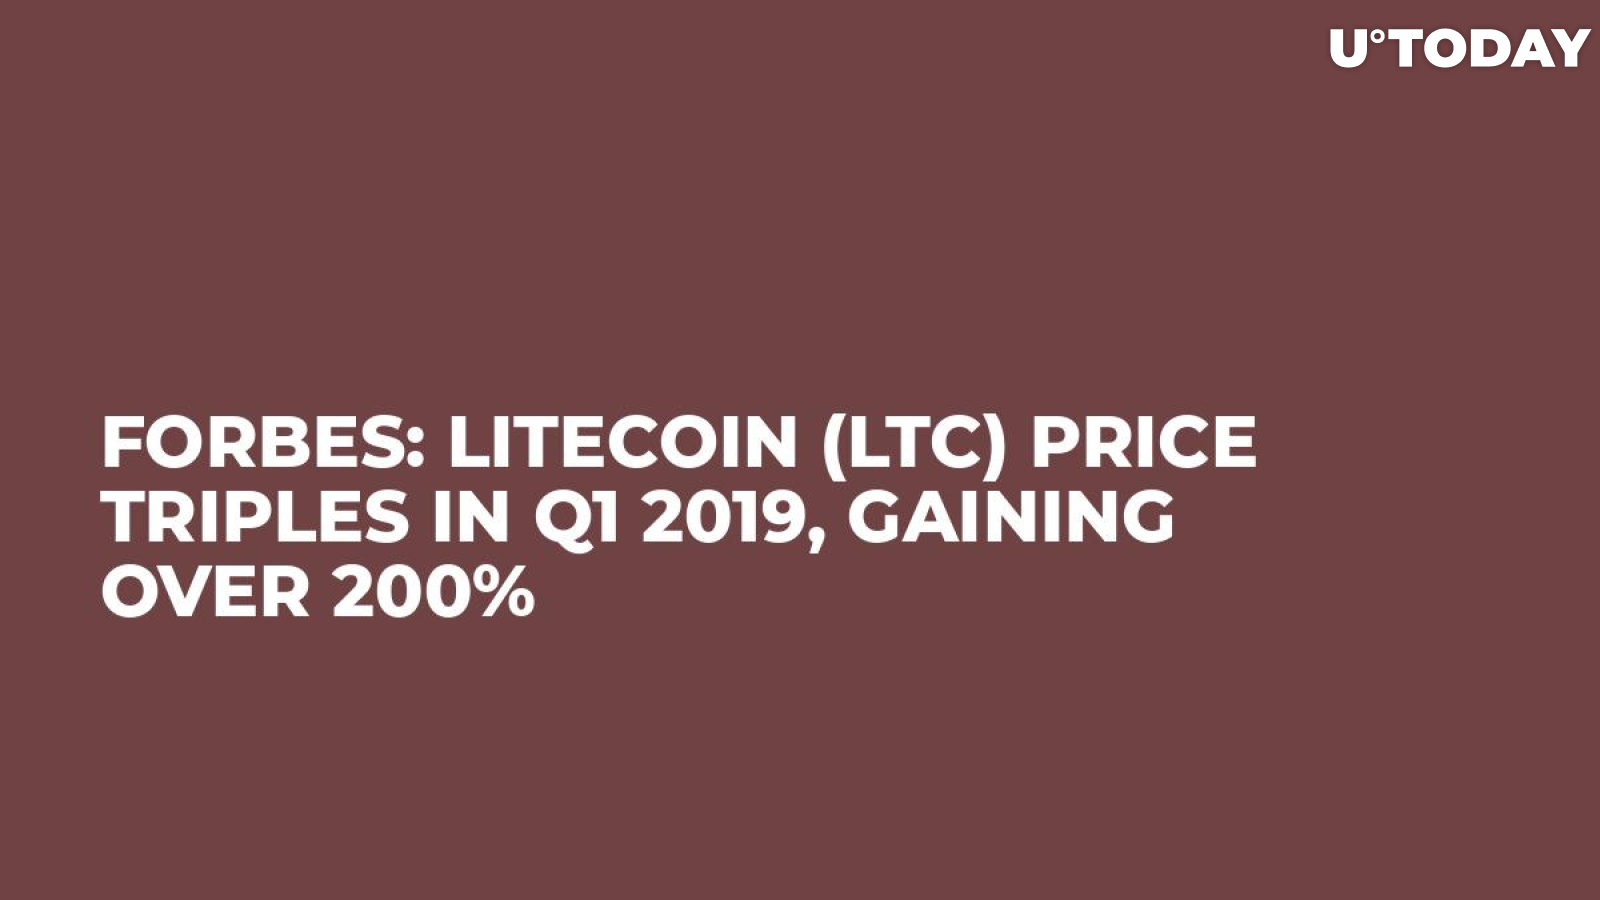 Forbes: Litecoin (LTC) Price Triples in Q1 2019, Gaining Over 200%